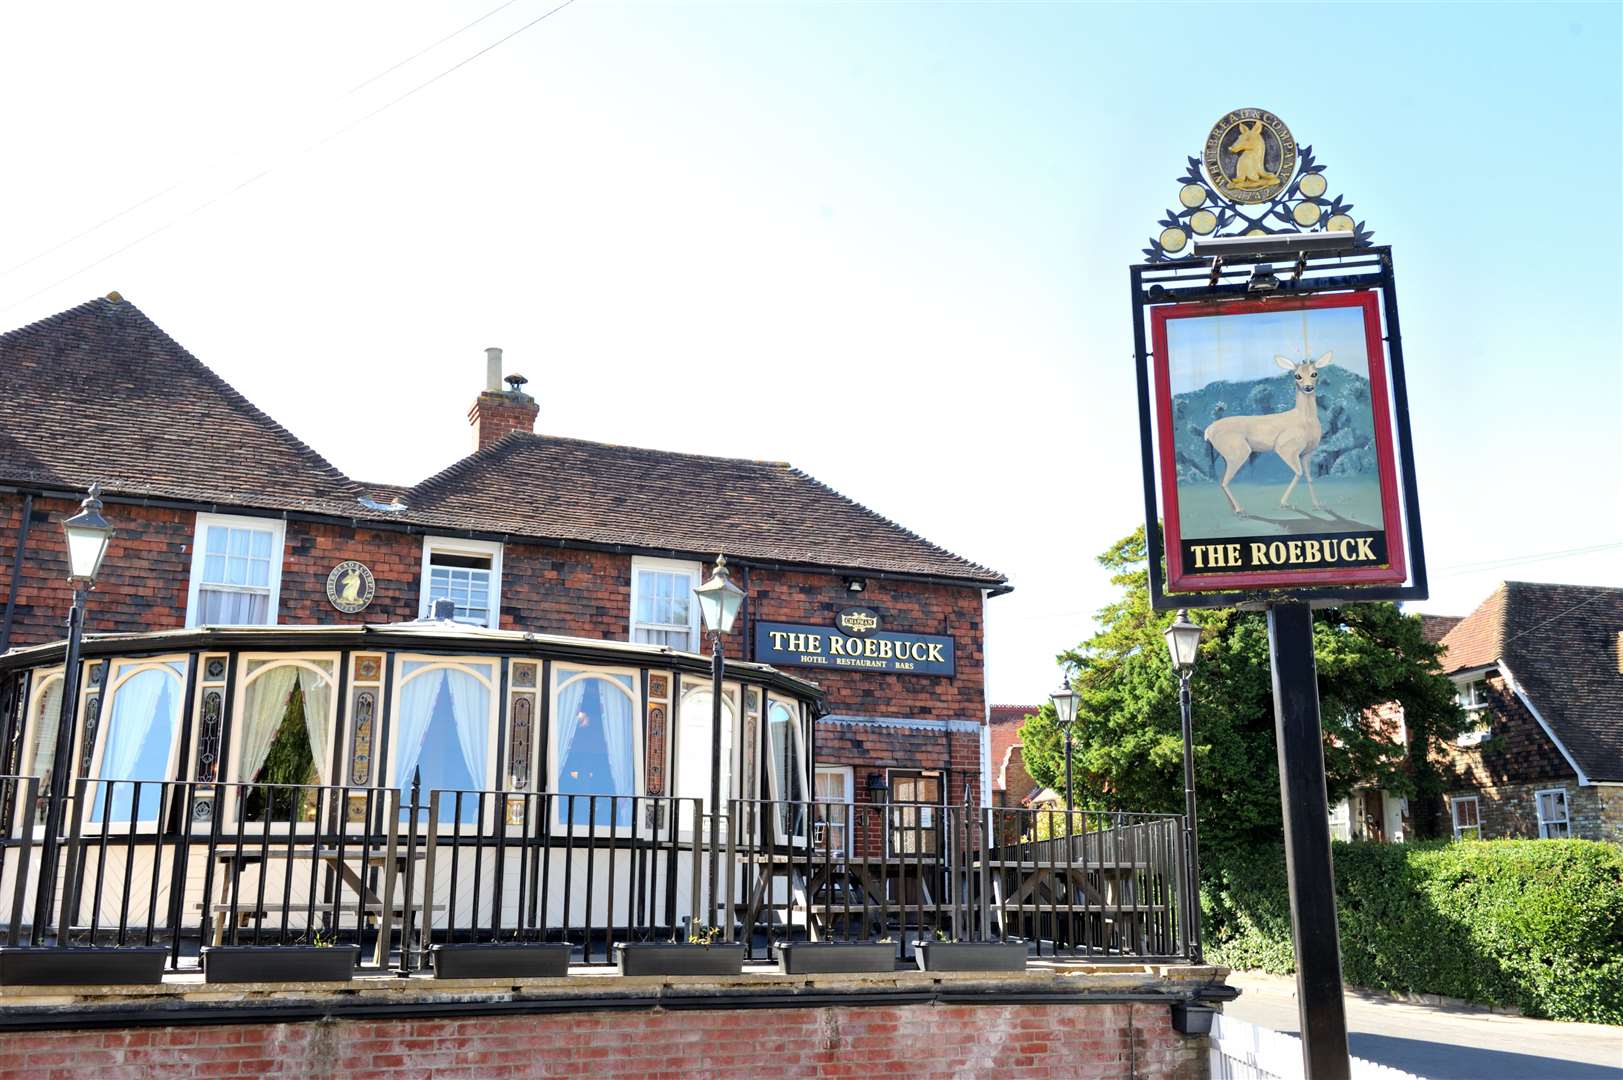 The Roebuck Inn is the only pub in the village